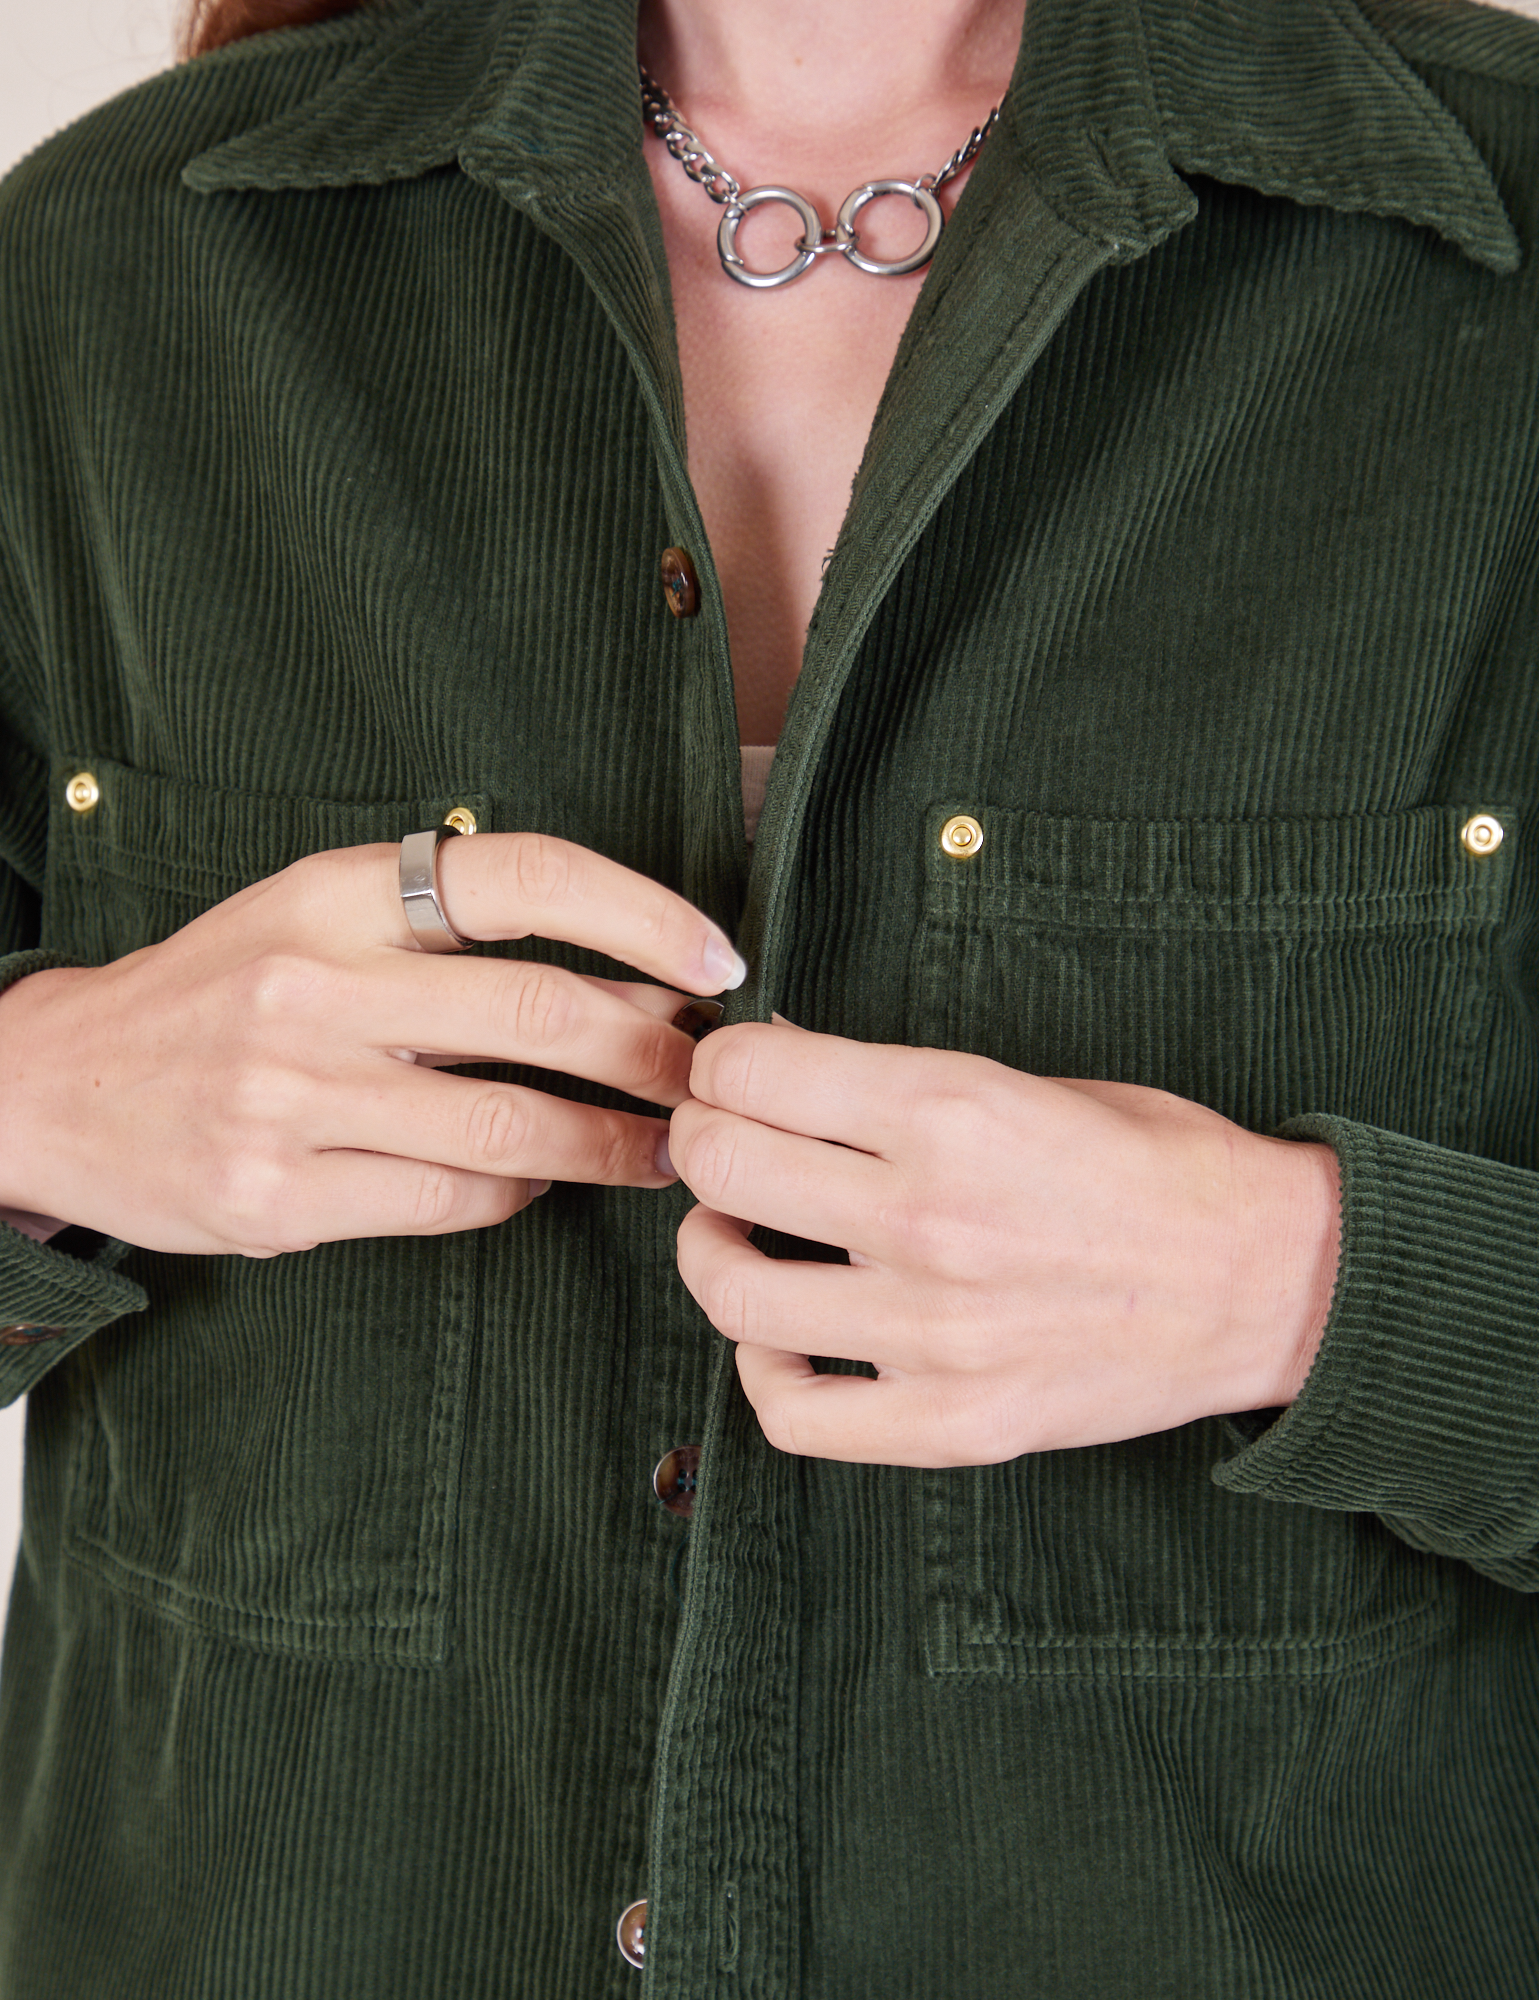 Corduroy Overshirt in Swamp Green front close up on Alex